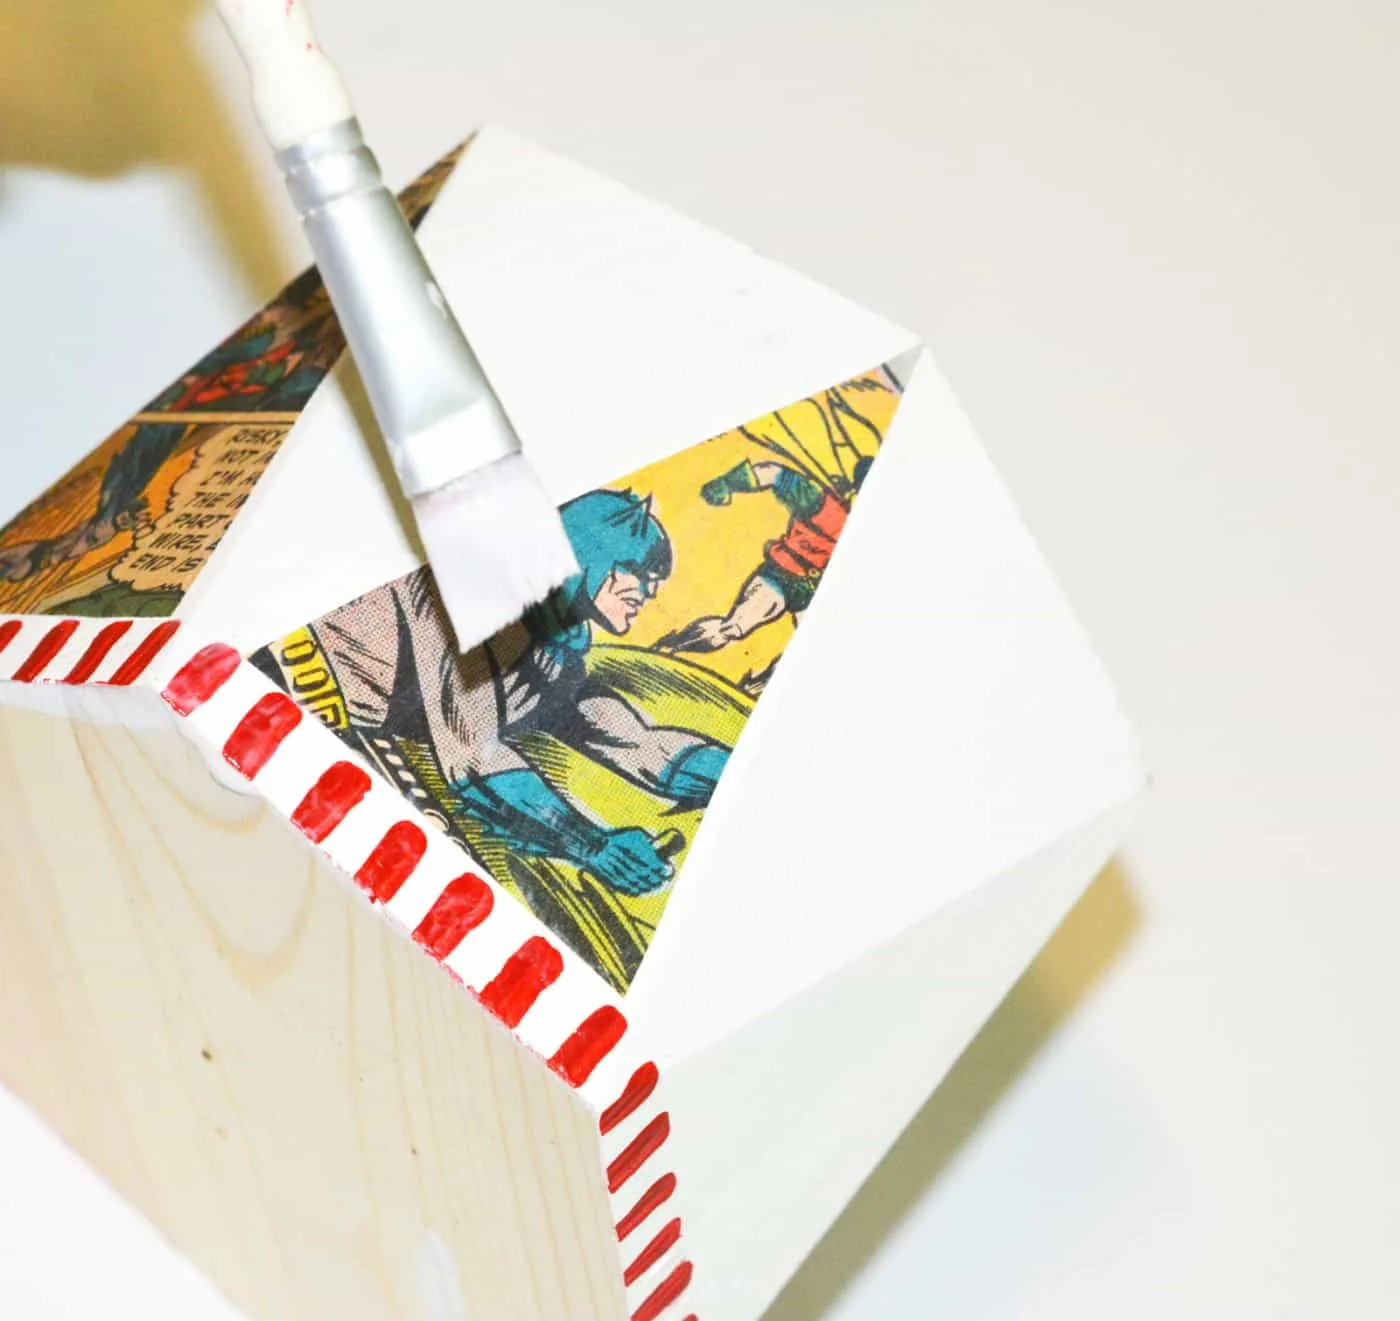 Add the comic book cut outs to the side of the pencil cup with Mod Podge